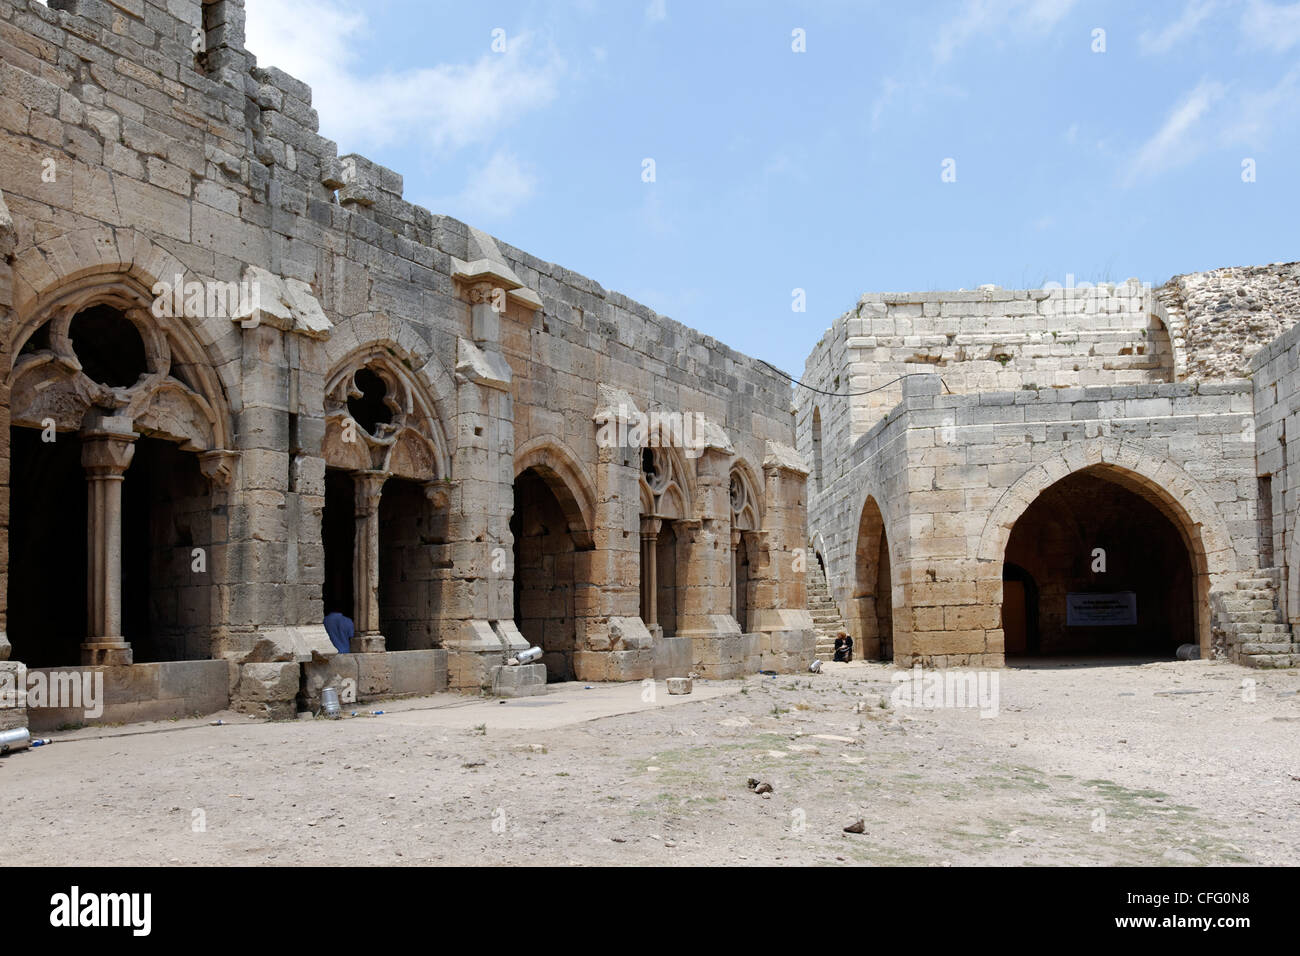 Krak des Chevaliers. Syria. The inner courtyard of the crusader castle is dominated by the striking Gothic style portico or Stock Photo